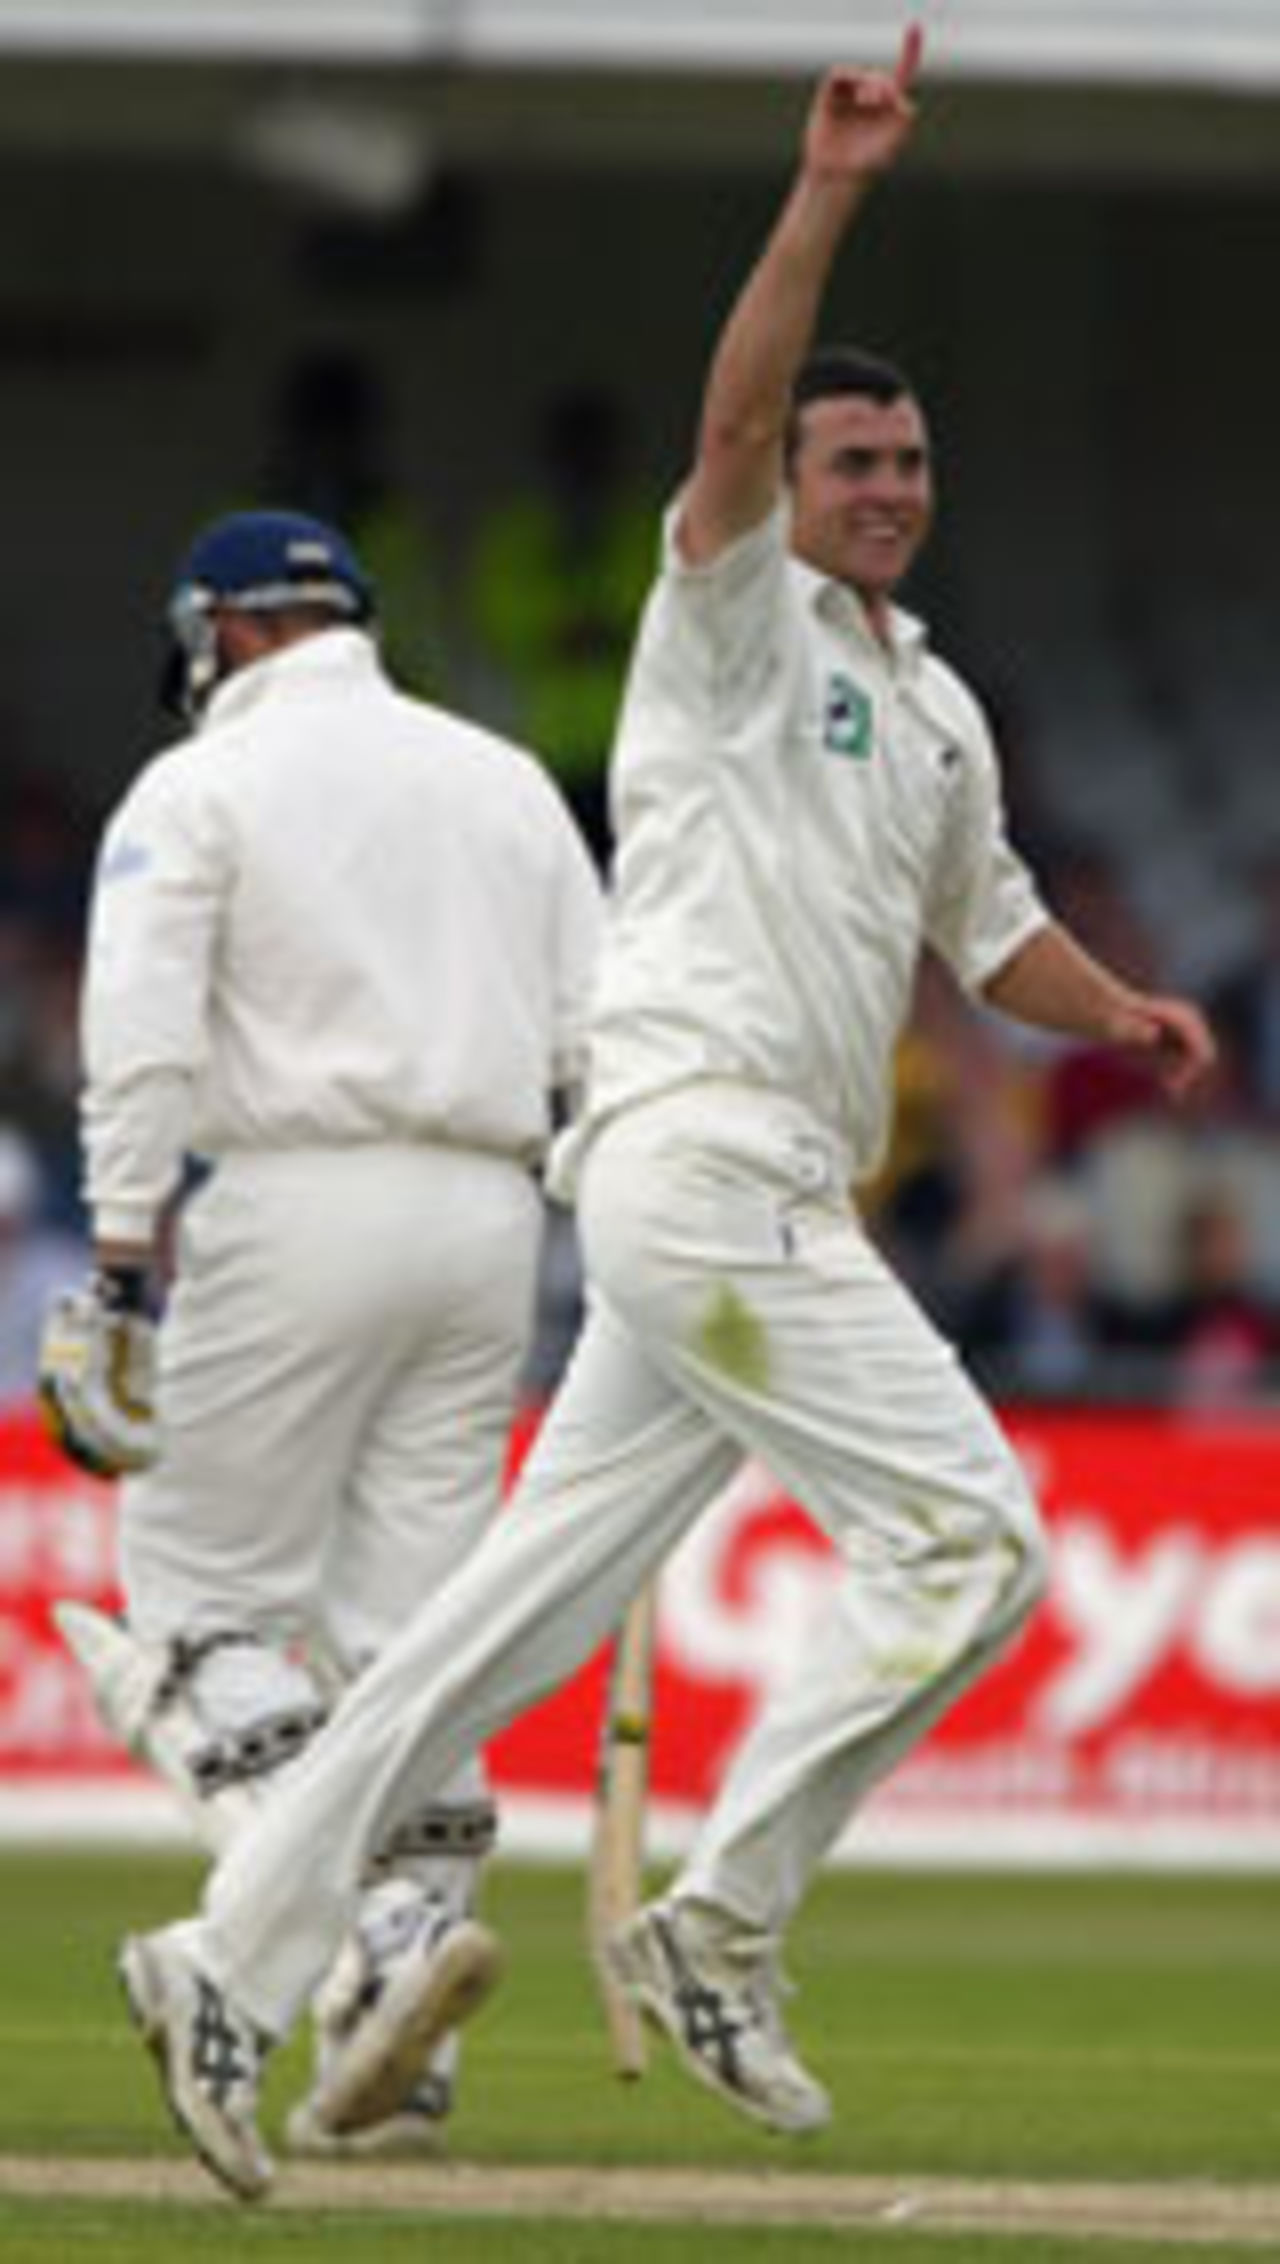 James Franklin celebrates the fall of an English wicket, England v New Zealand, 3rd Test, Trent Bridge, 12 June 2004